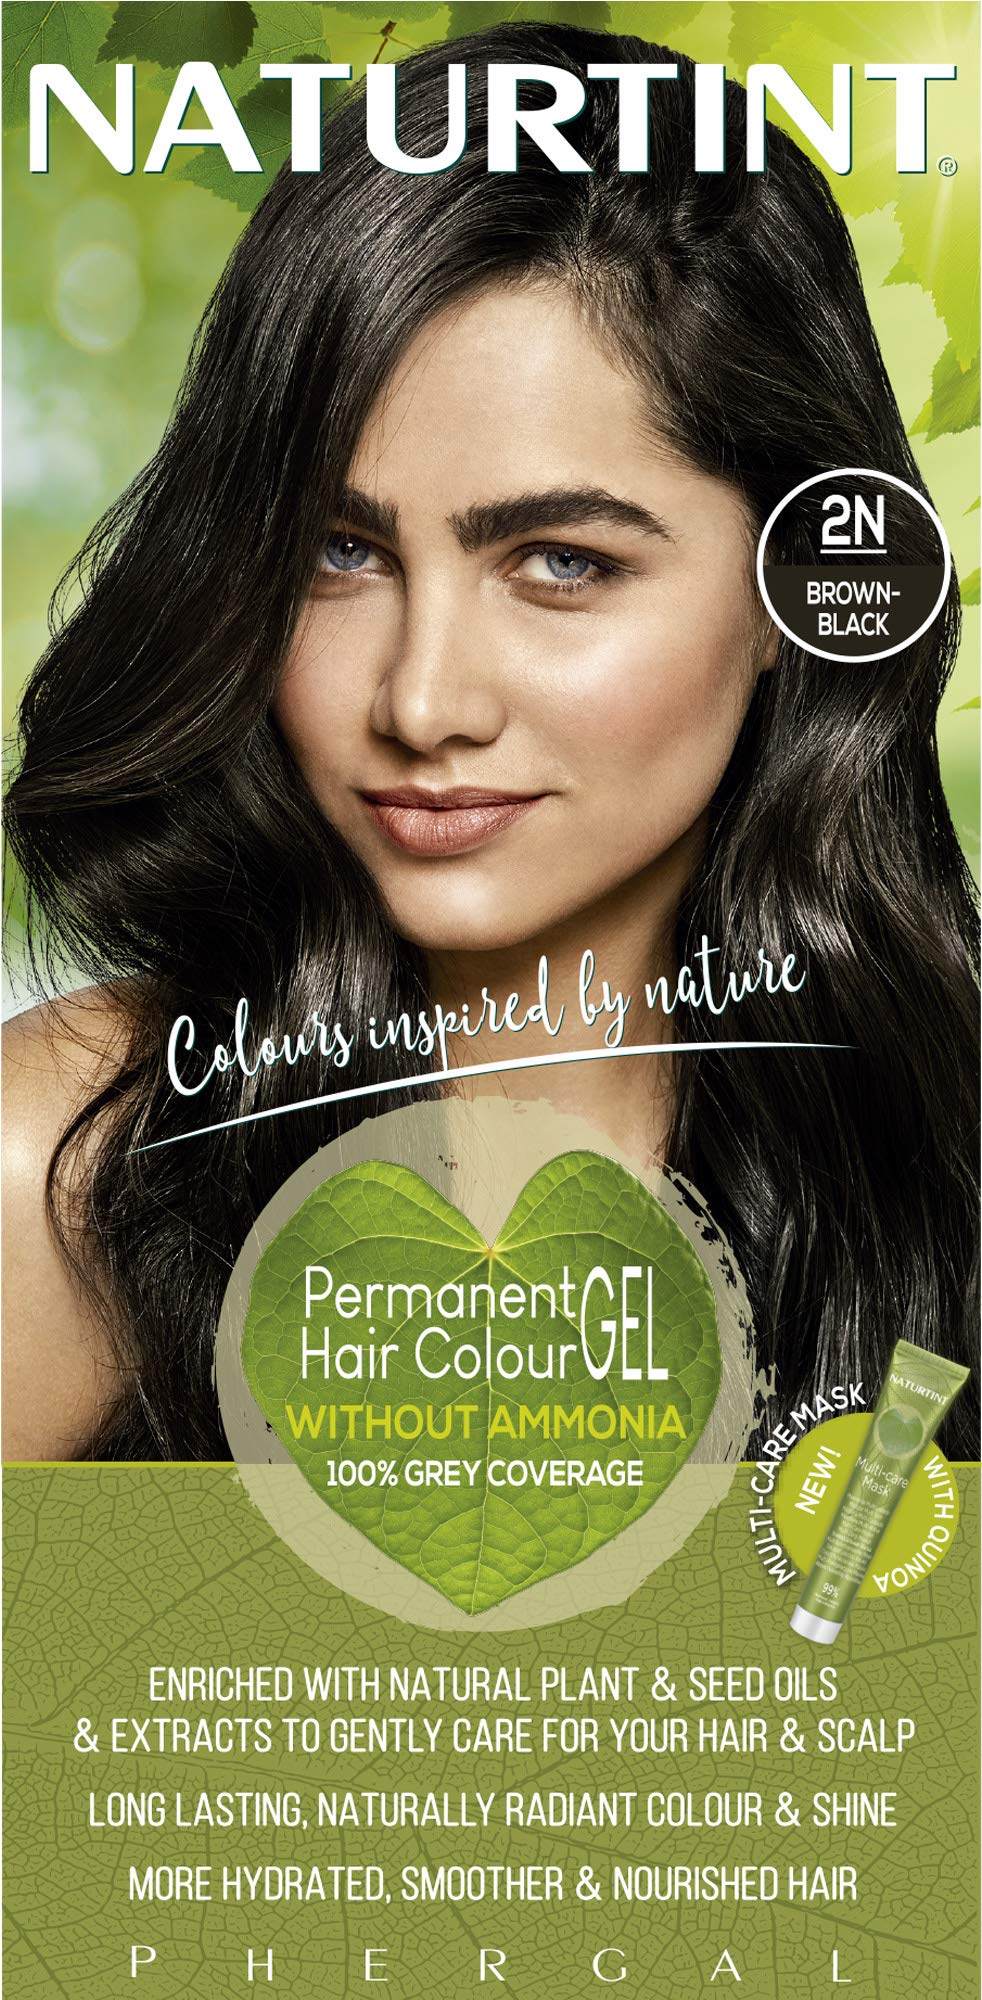 Naturtint Permanent Hair Color 2N Brown Black (Pack of 1), Ammonia Free, Vegan, Cruelty Free, up to 100% Gray Coverage, Long Lasting Results